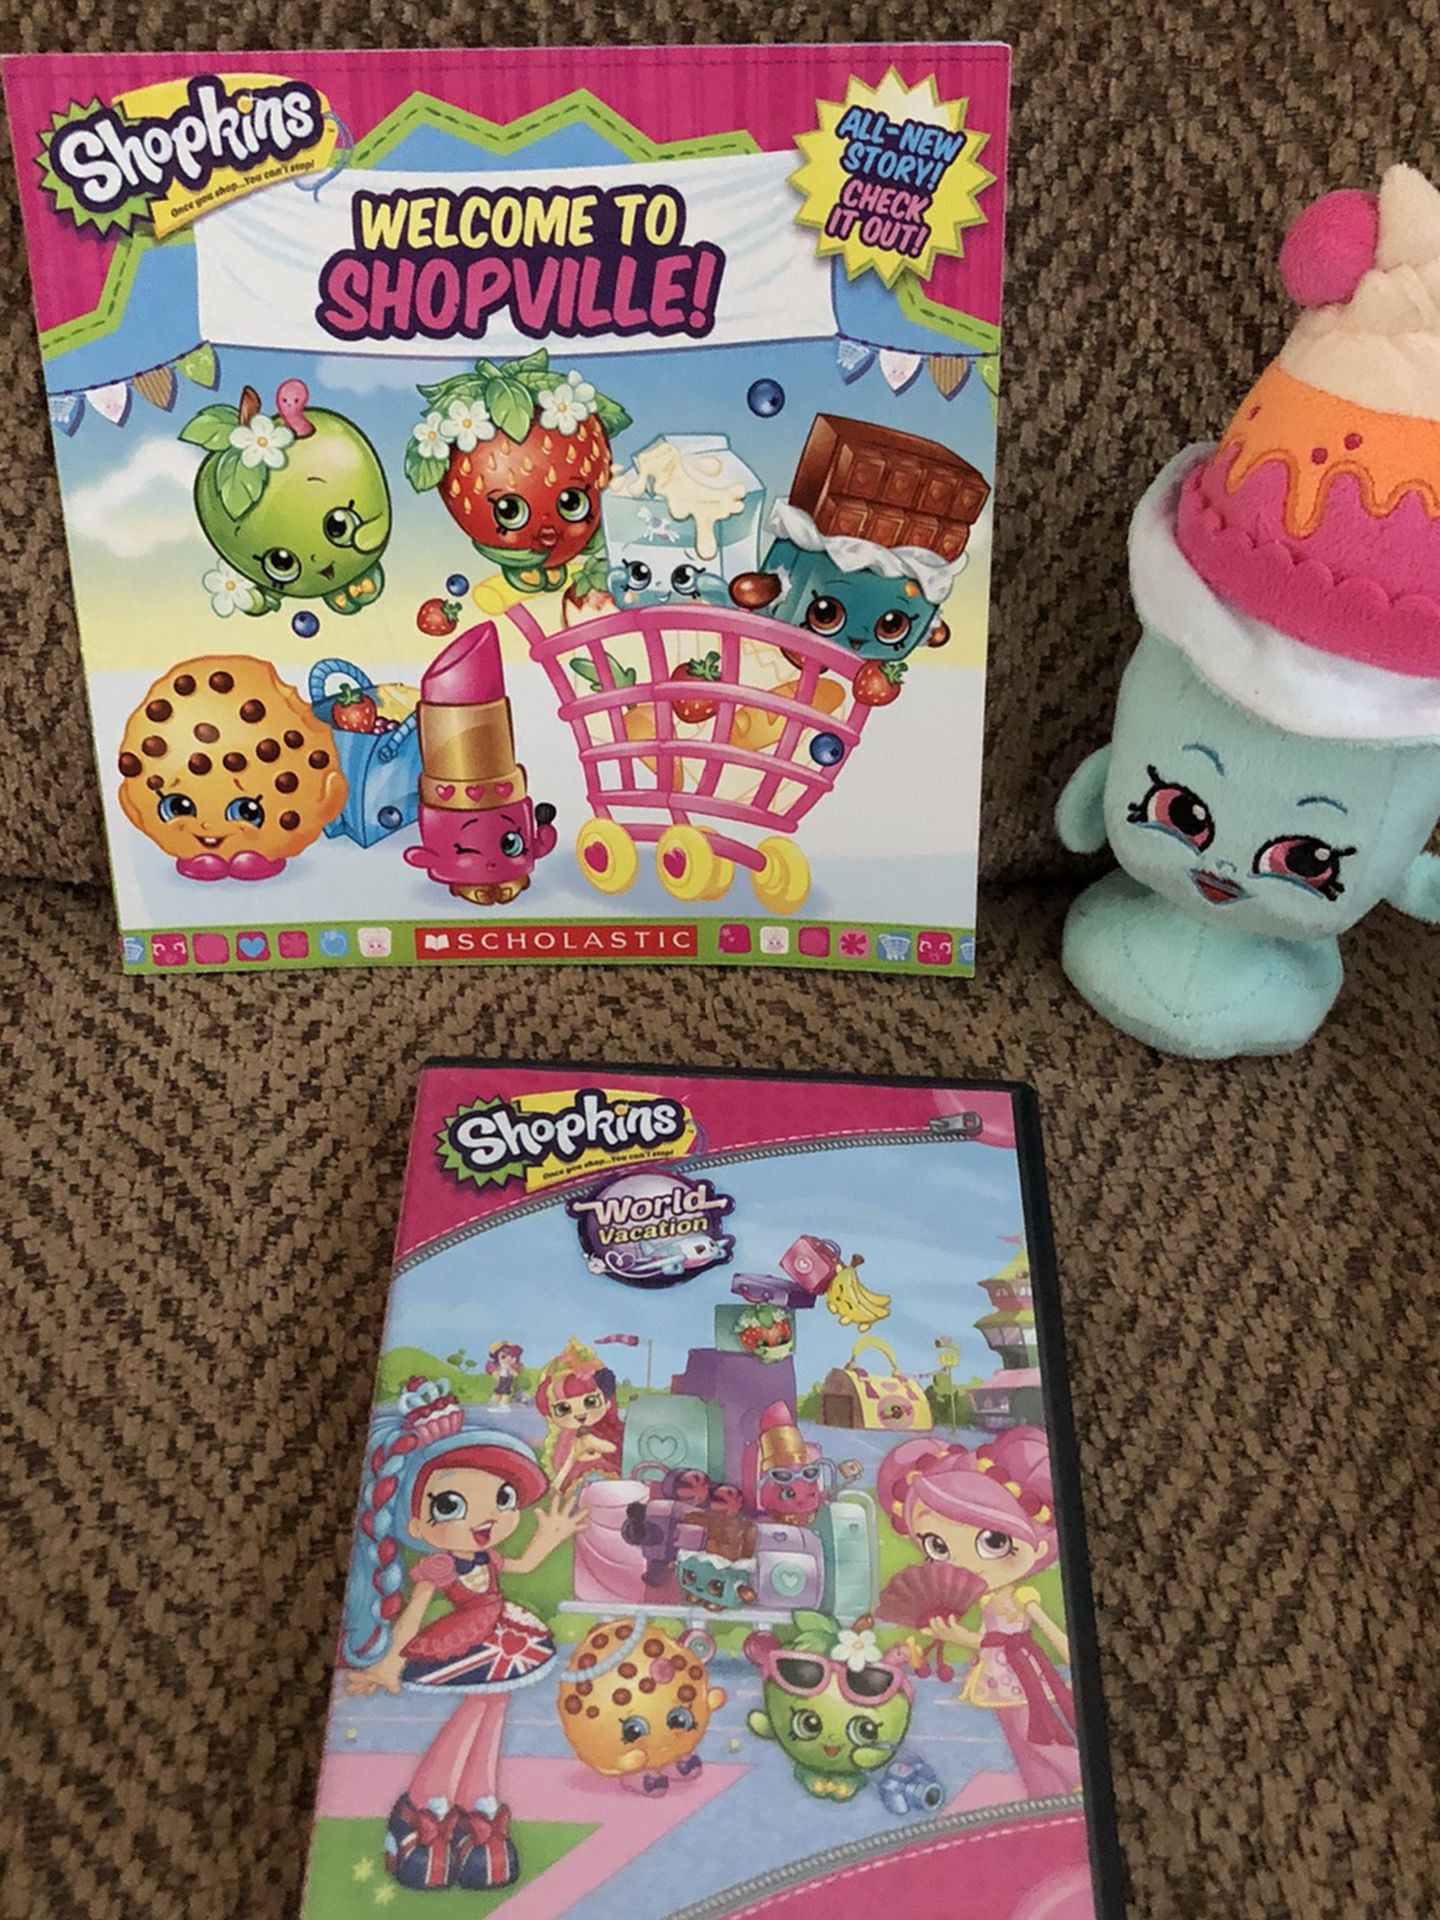 Shopkins book, plush toy, and dvd